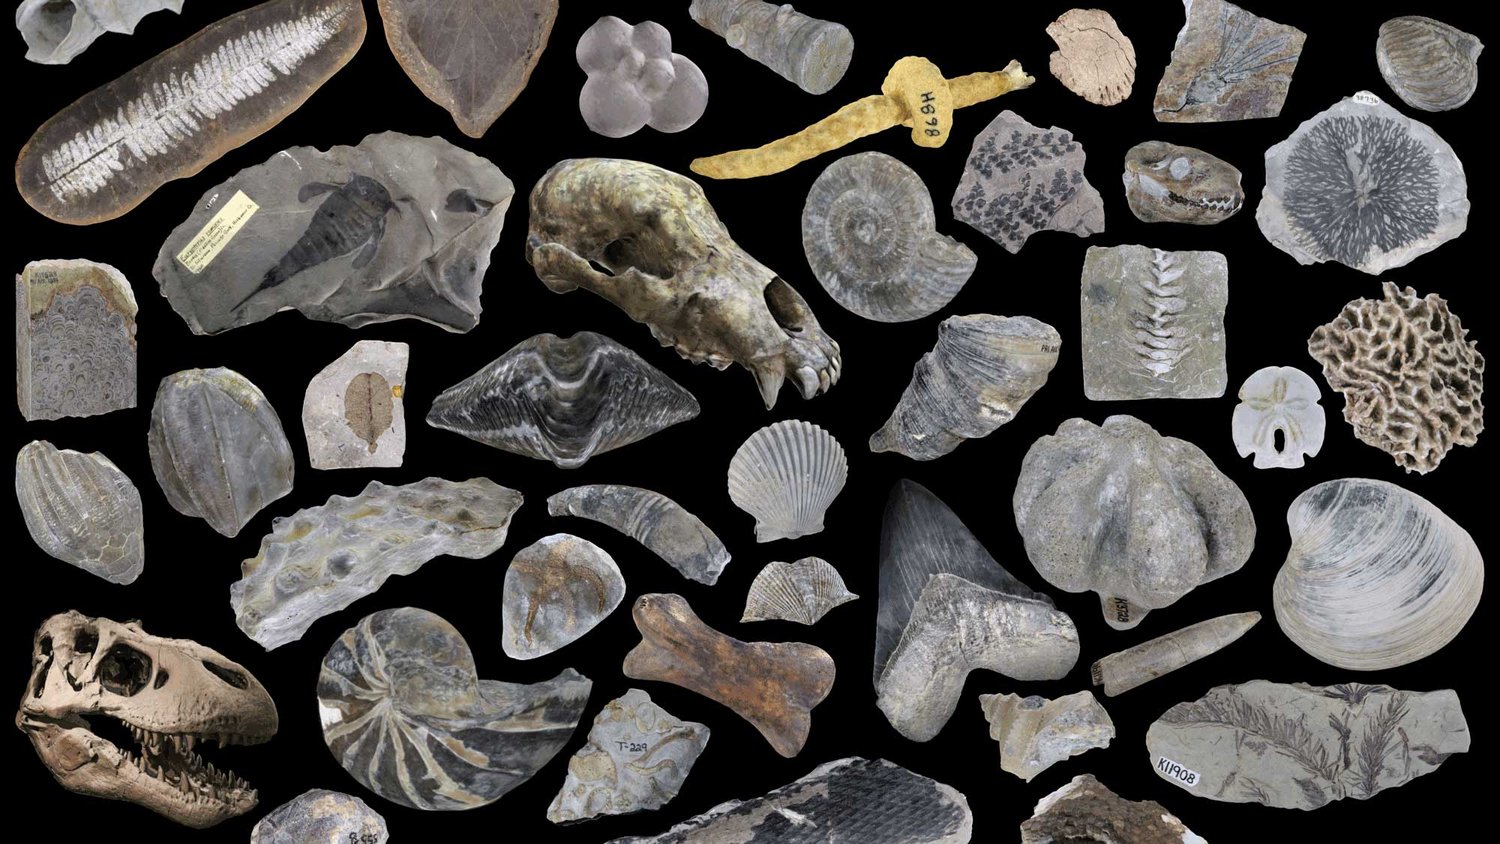 Image showing a diversity of different types of fossils.